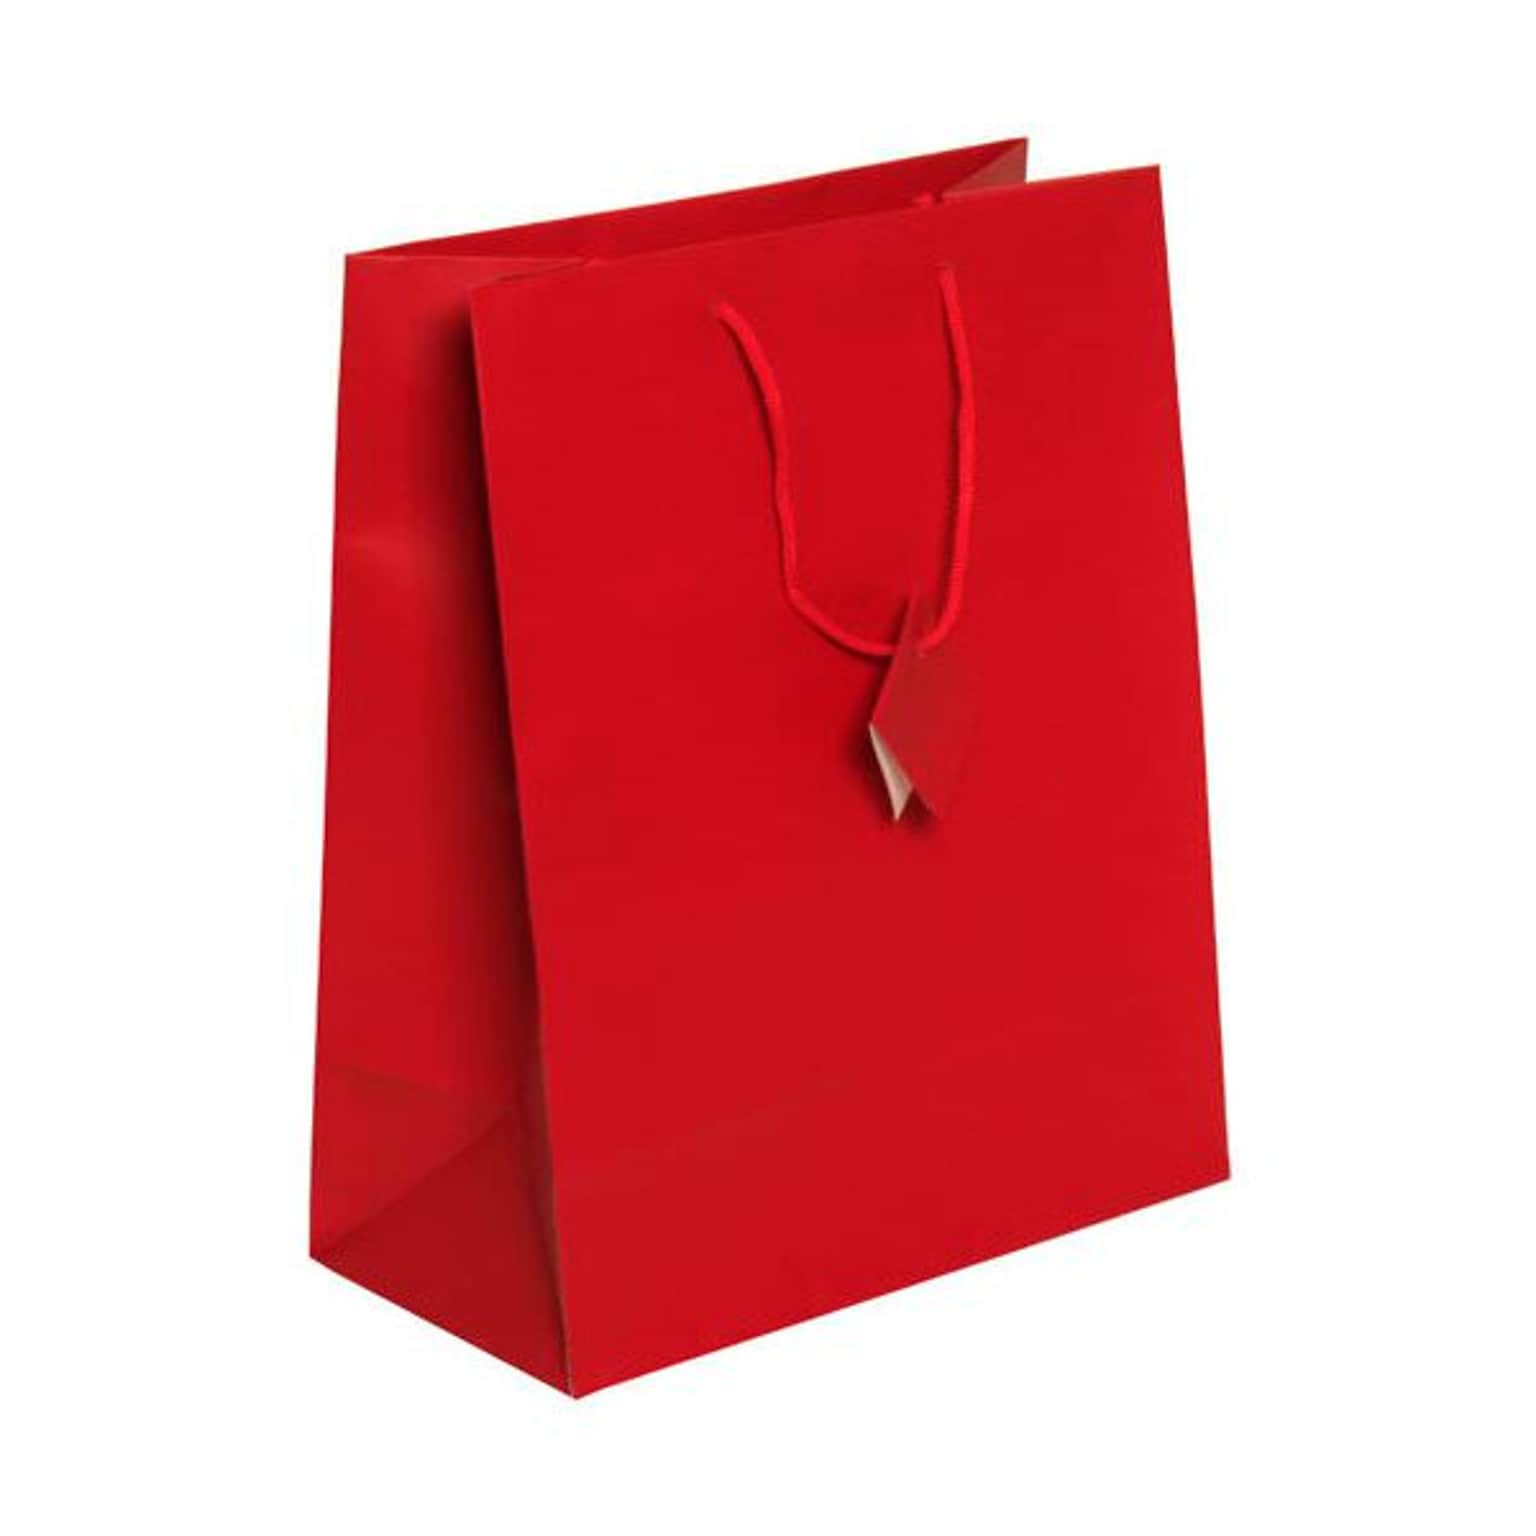 JAM PAPER Gift Bags with Rope Handles, Large, 10 x 13 x 5, Red Matte, 3/Pack (673MAREA)